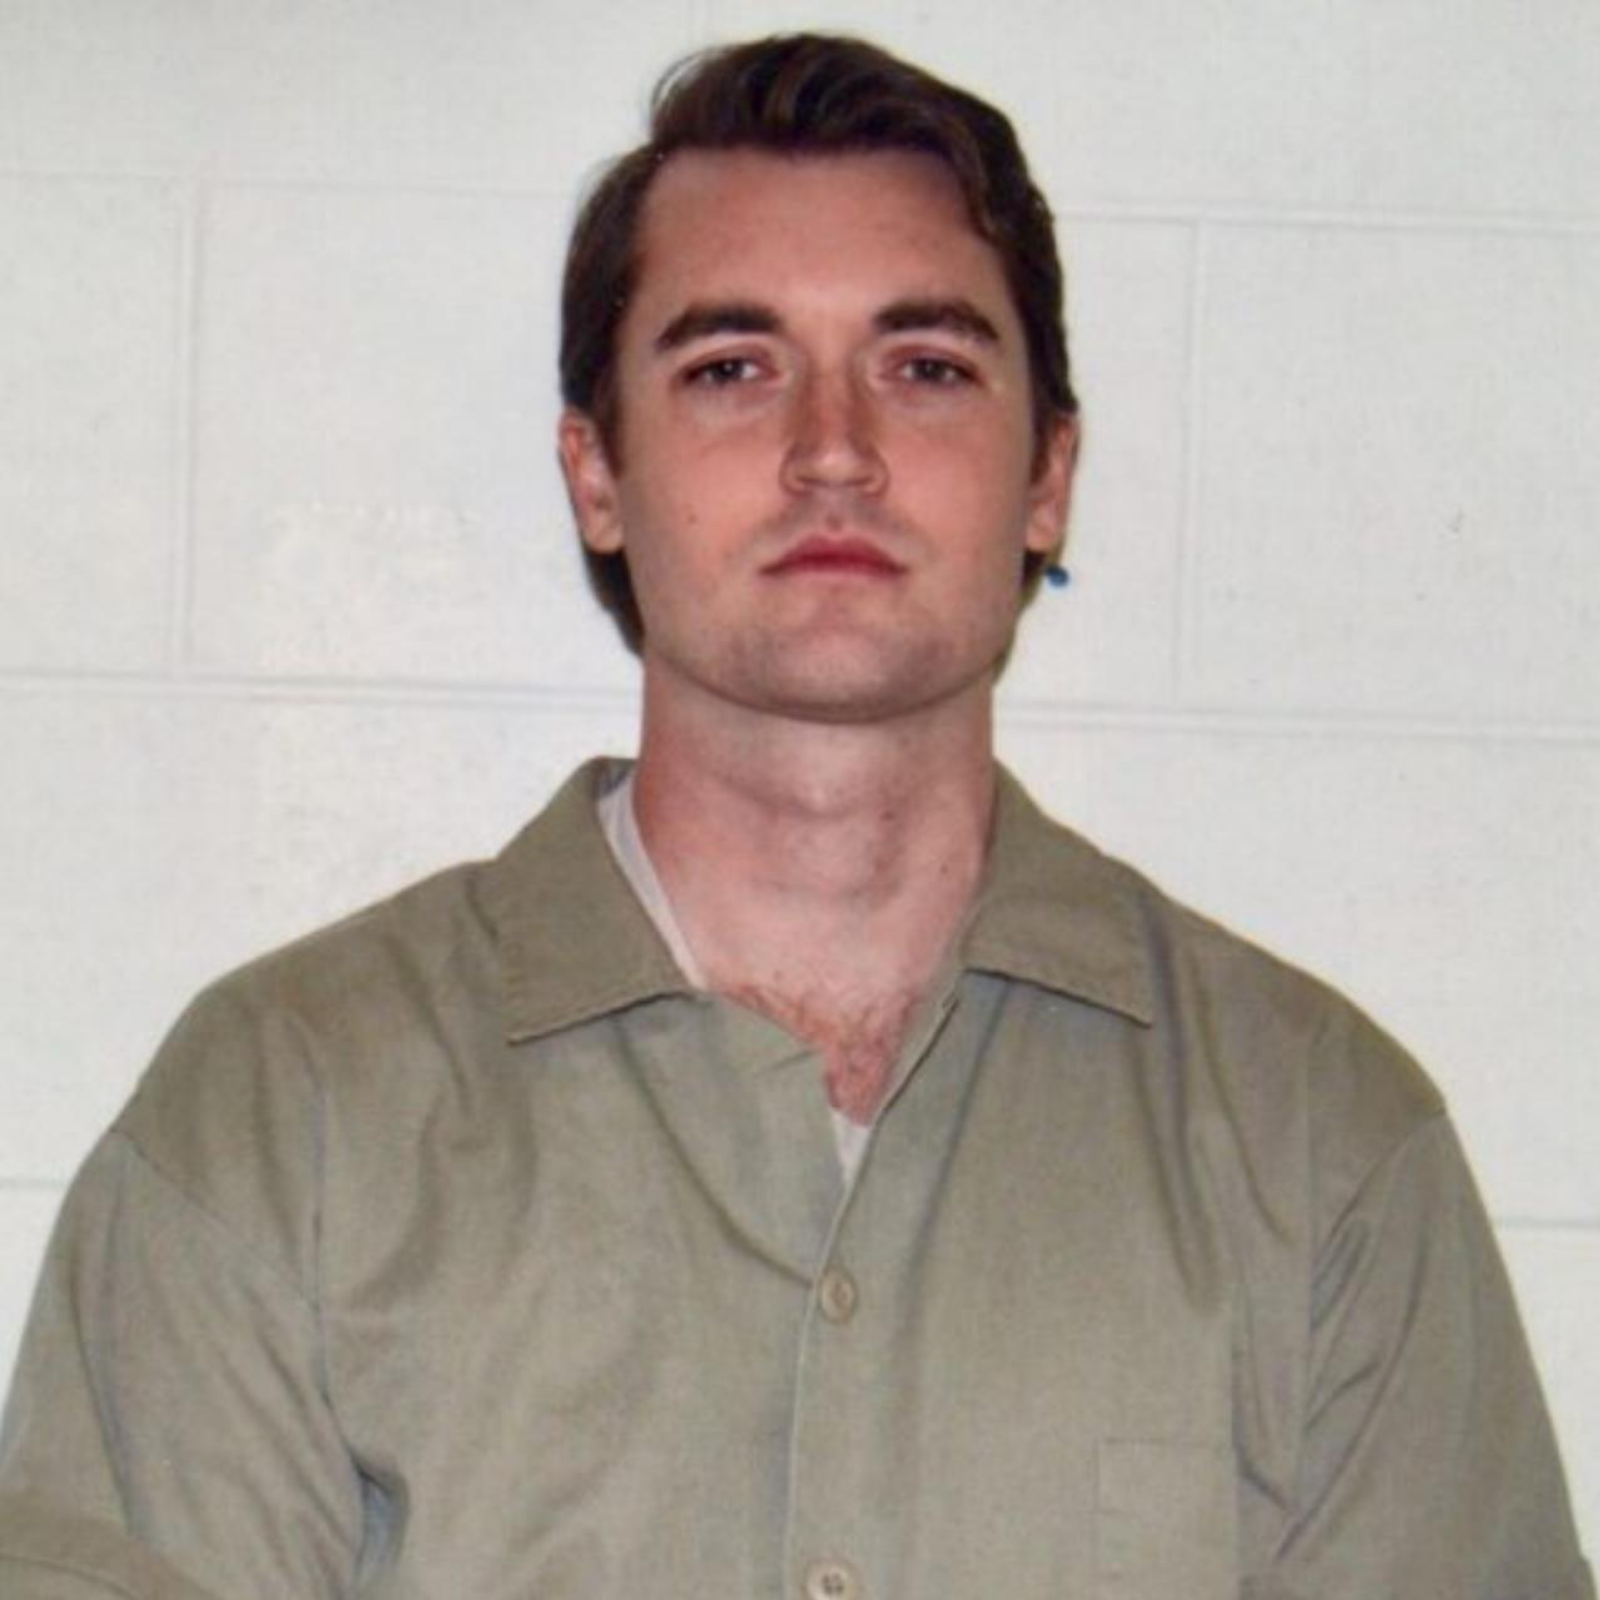 Change.org Petition to Fight for Ross Ulbricht's Freedom and Justice